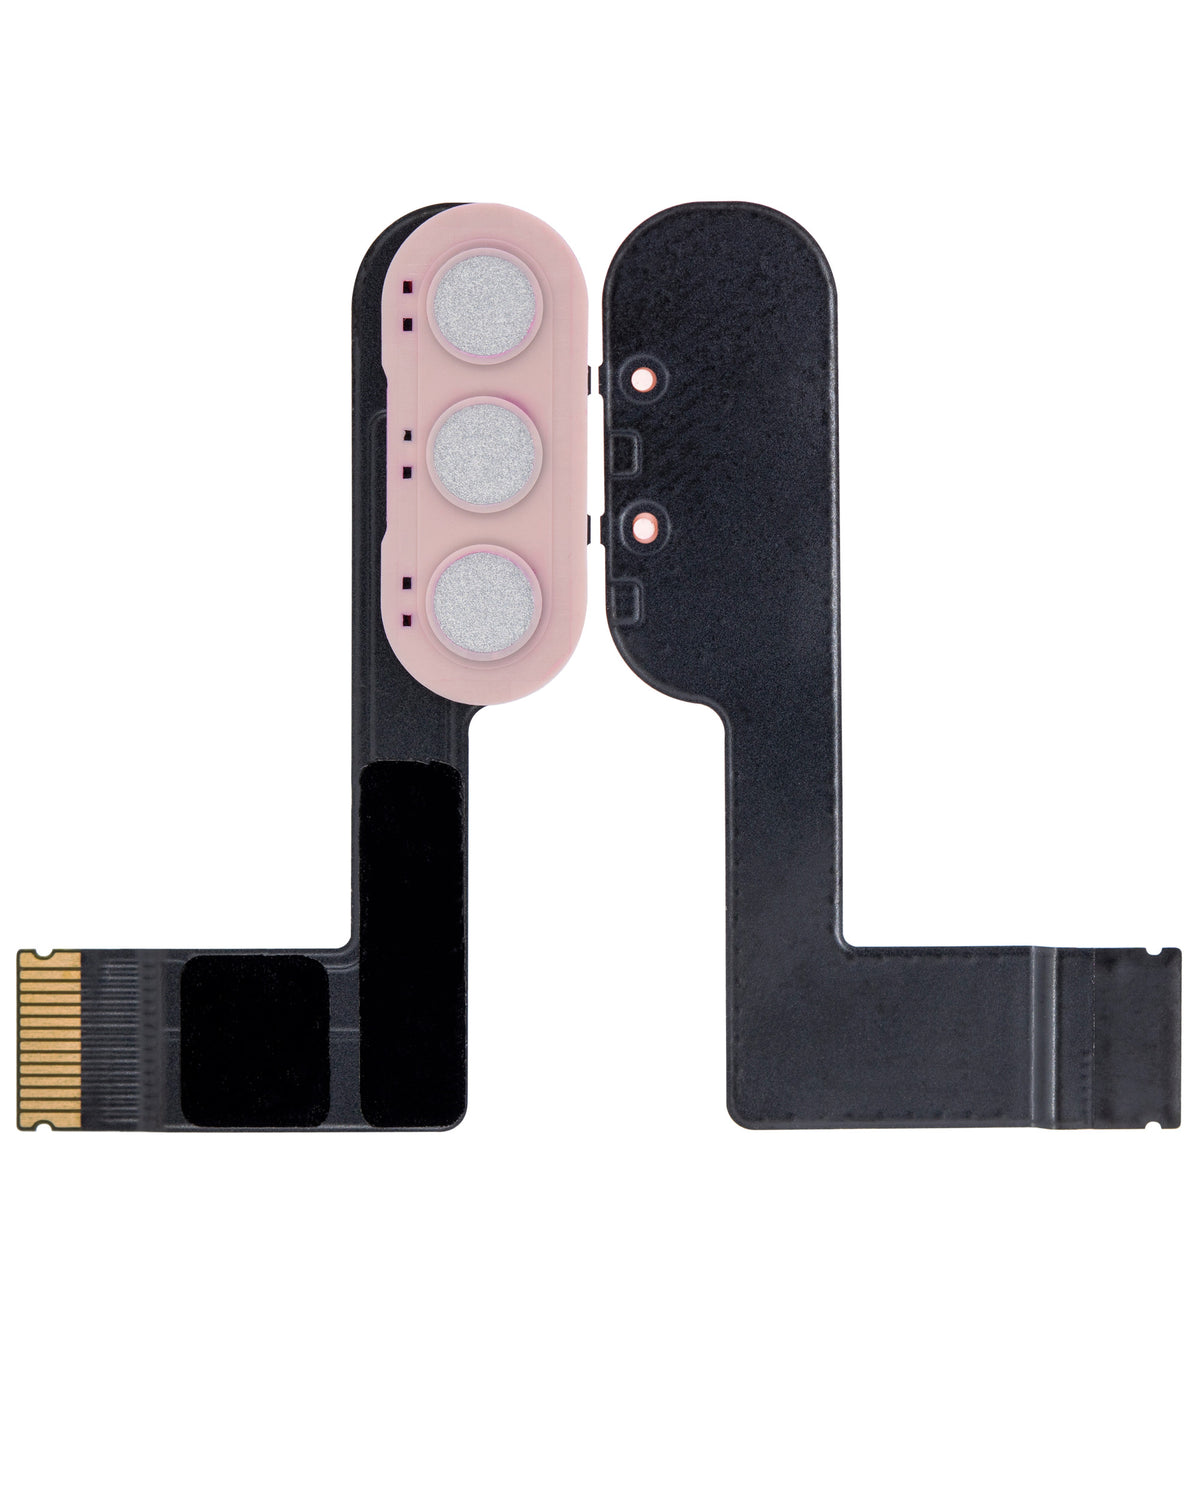 KEYBOARD FLEX CABLE COMPATIBLE FOR IPAD AIR 4 - ROSE GOLD